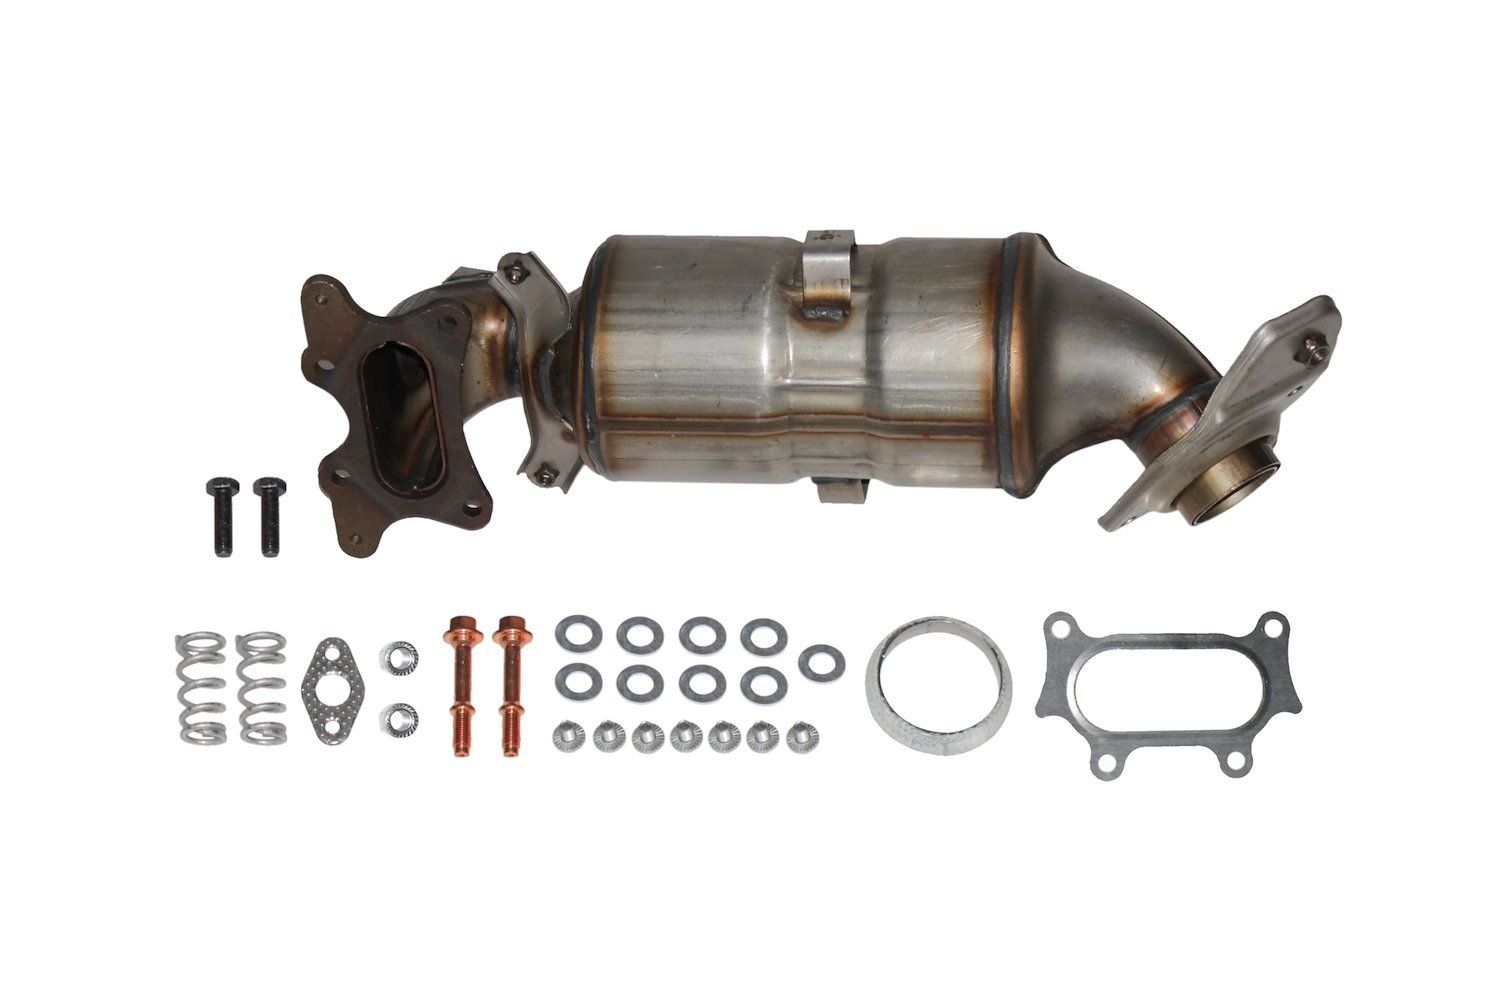 Catalytic Converter Fits 2013-2014 Acura ILX, 2012-2013 Honda Civic w/1.8L 4 cyl. Eng. [Front]